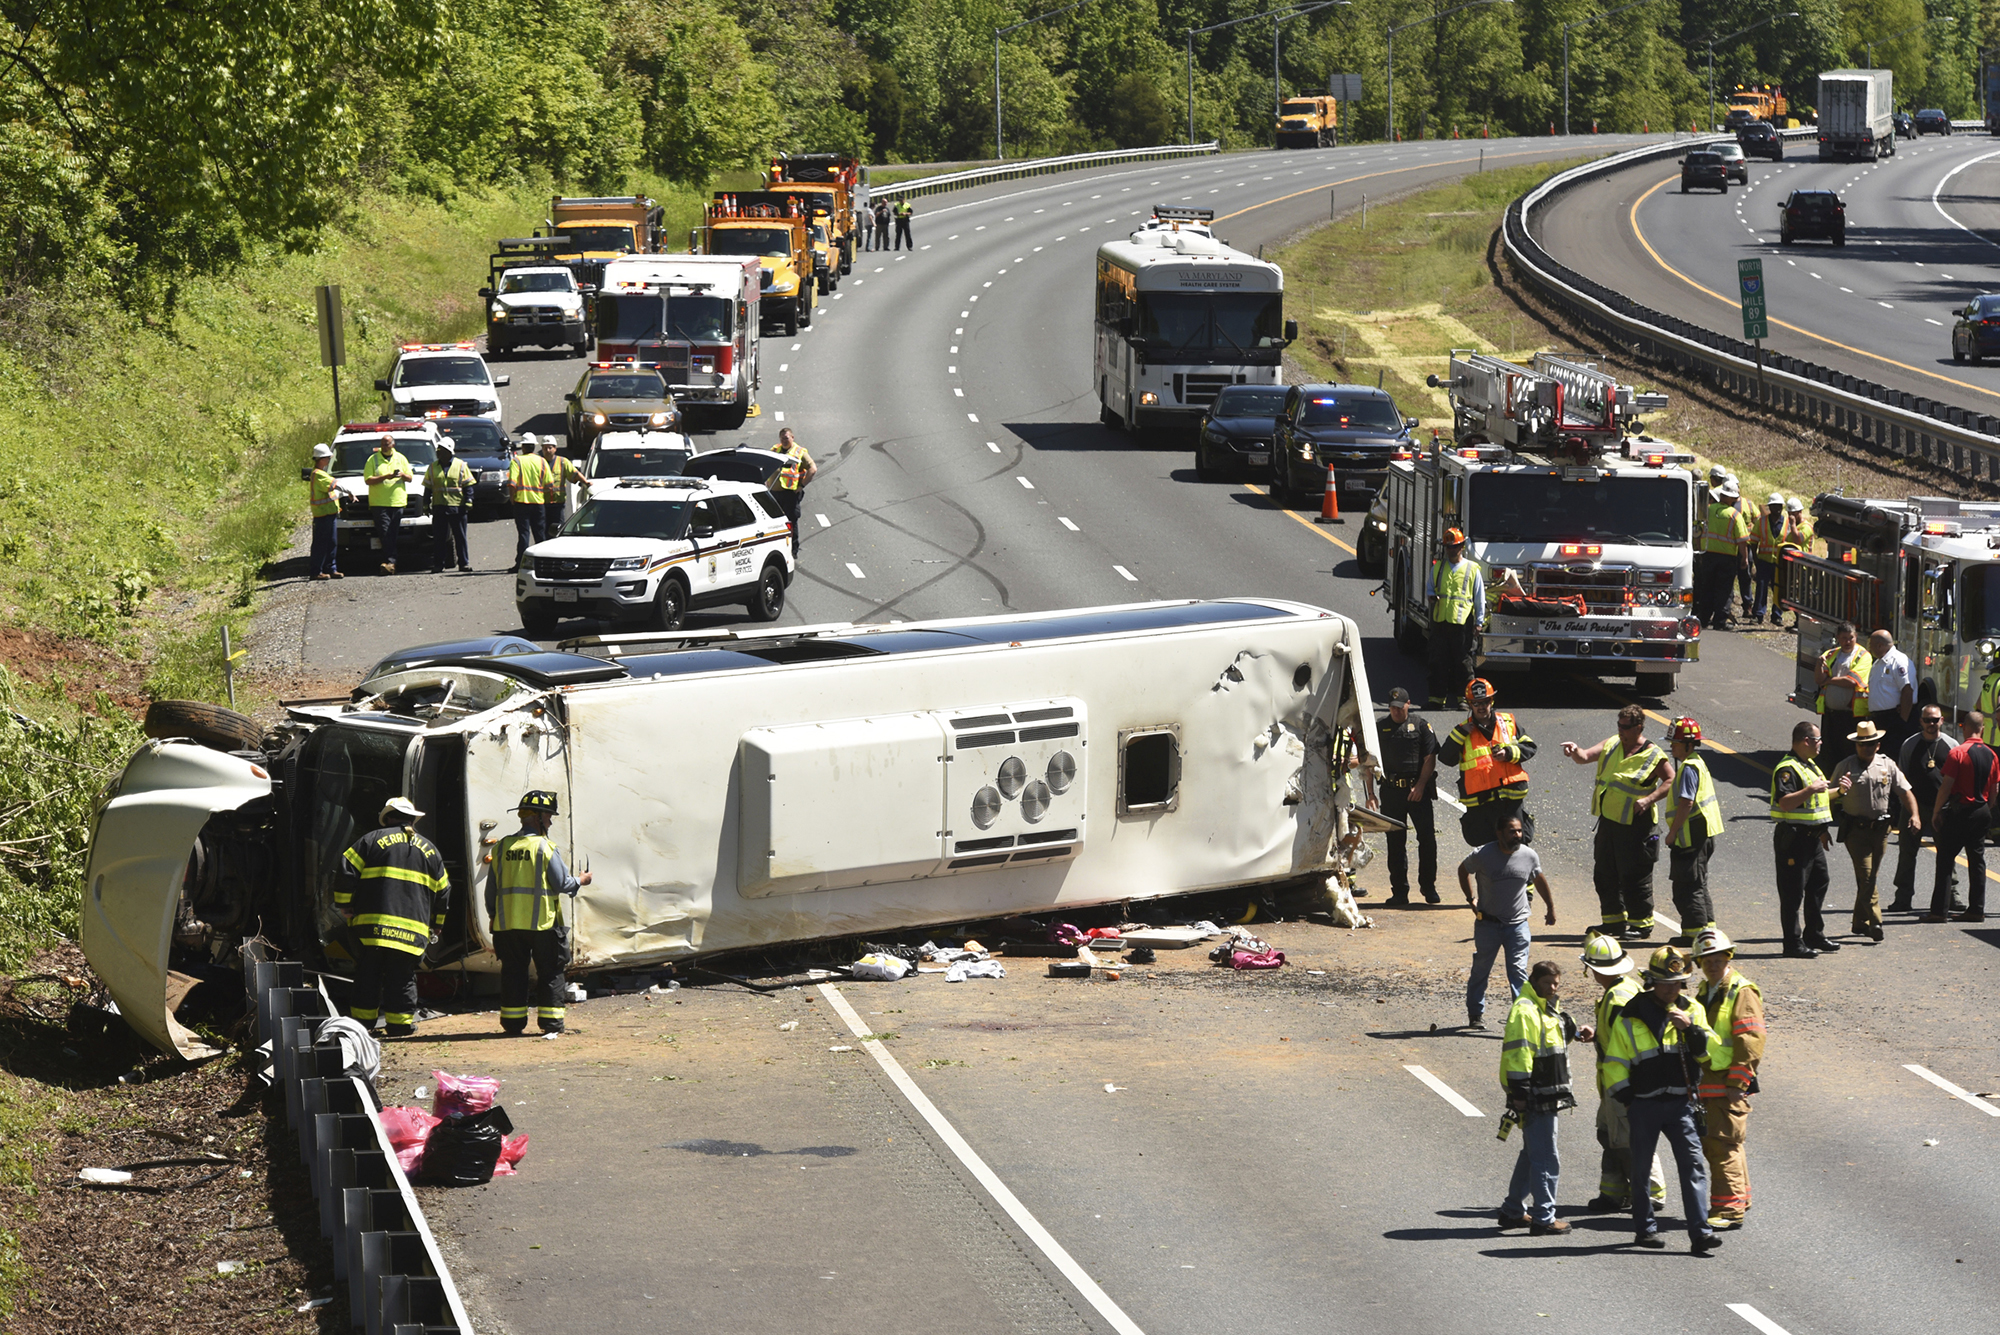 Emergency workers tend to an overturned bus on I-95 southbound in Havre de Grace, Md., on May 15, 2017. (Amy Davis—AP)